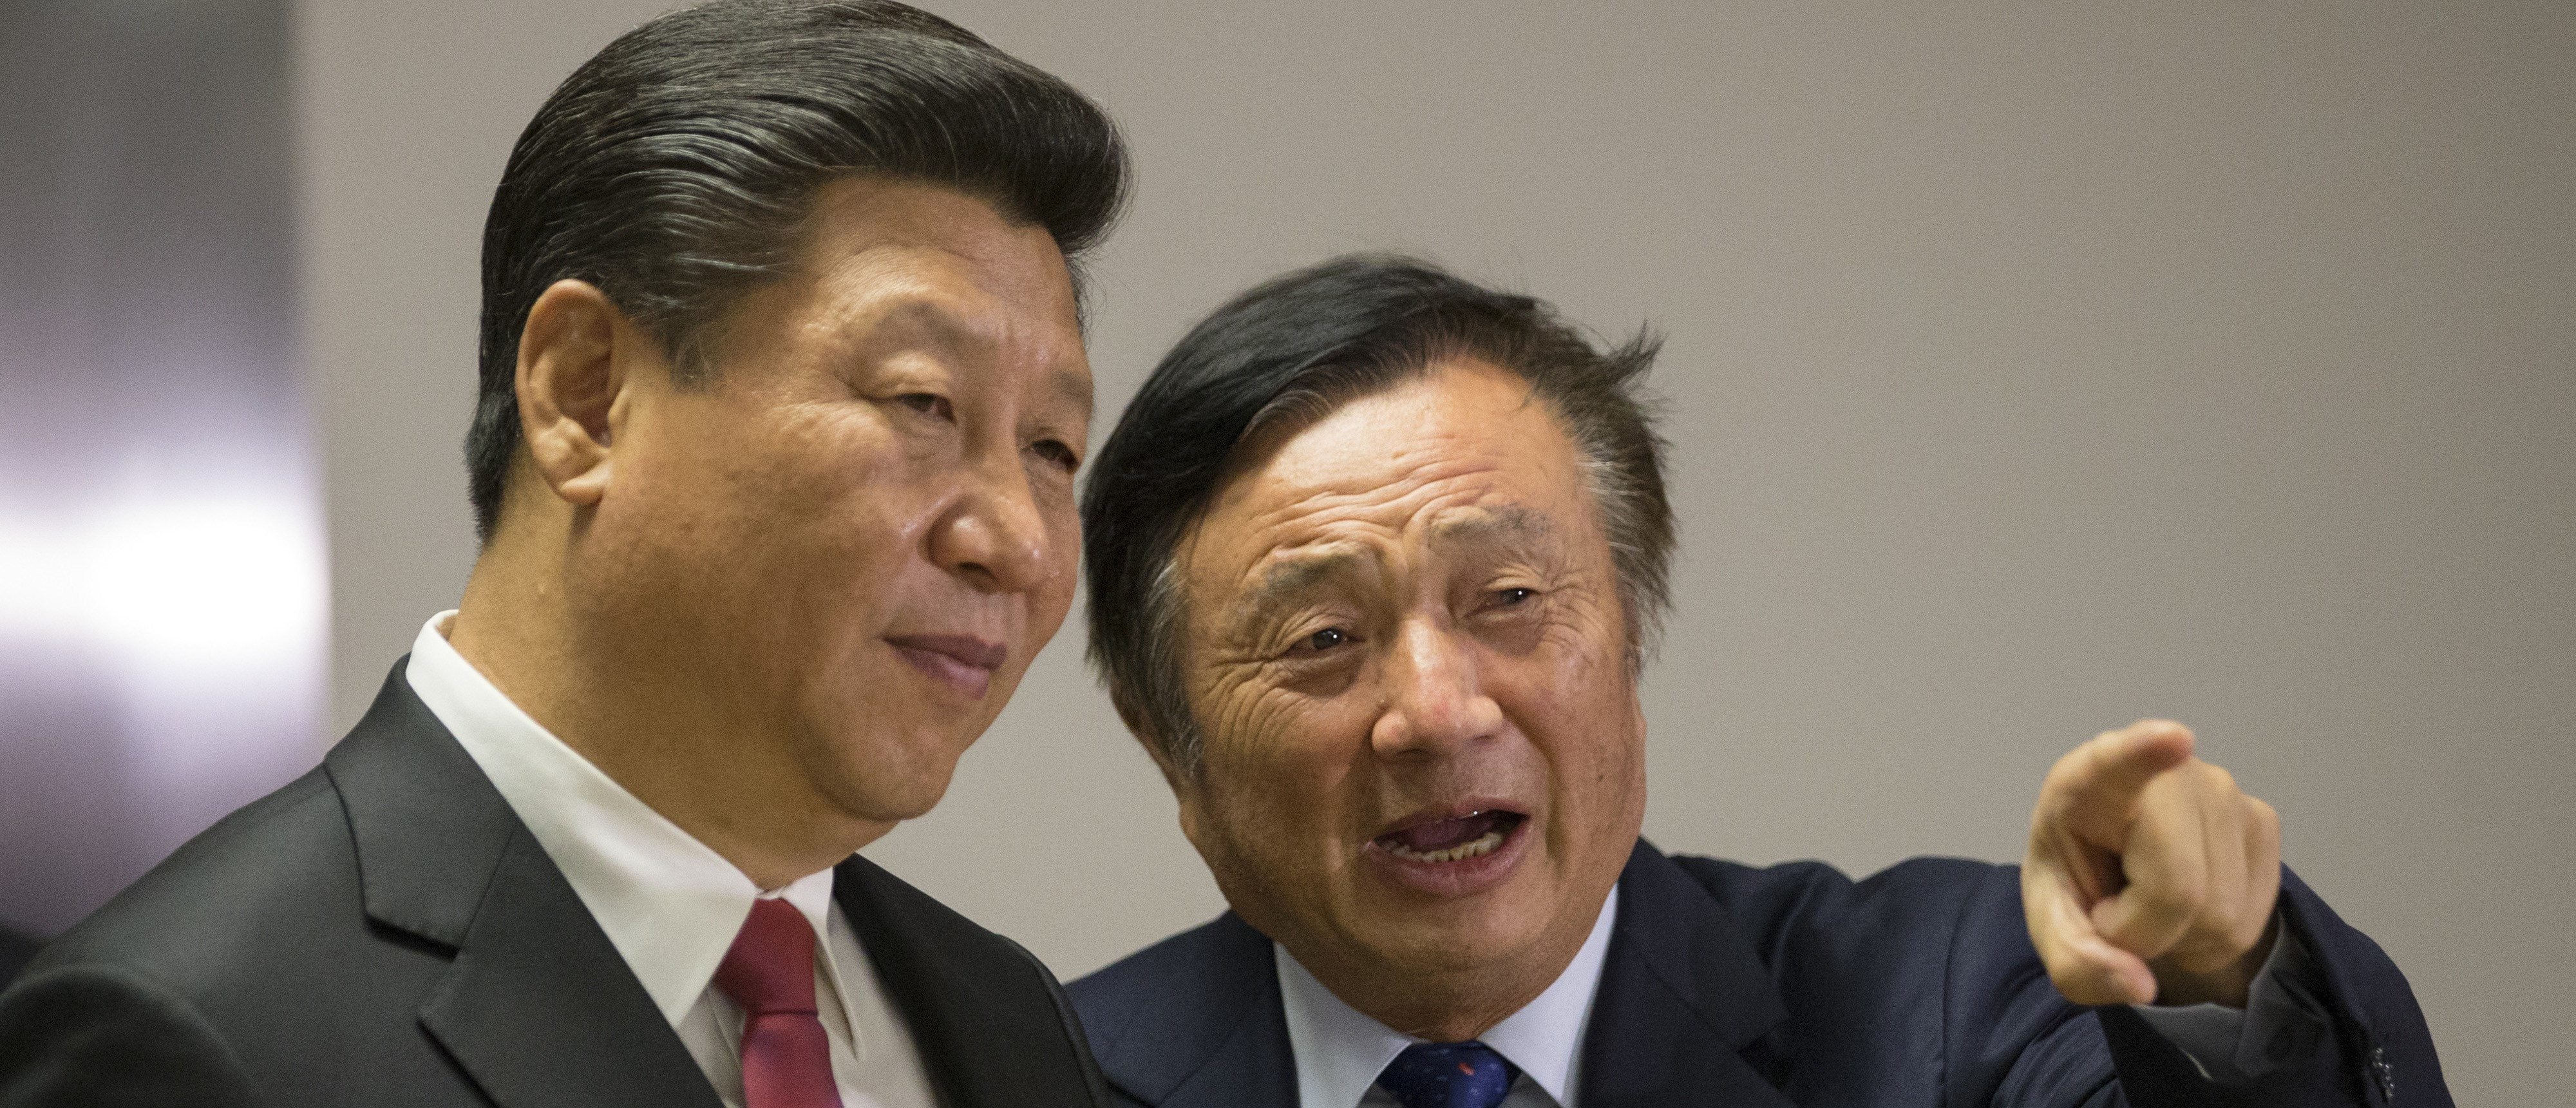 Chinese President Xi Jinping (L) is shown around the offices of Chinese tech firm Huawei technologies by its President Ren Zhengfei in London during his state visit on October 21, 2015. AFP PHOTO / POOL / Matthew Lloyd (Photo credit should read MATTHEW LLOYD/AFP via Getty Images)